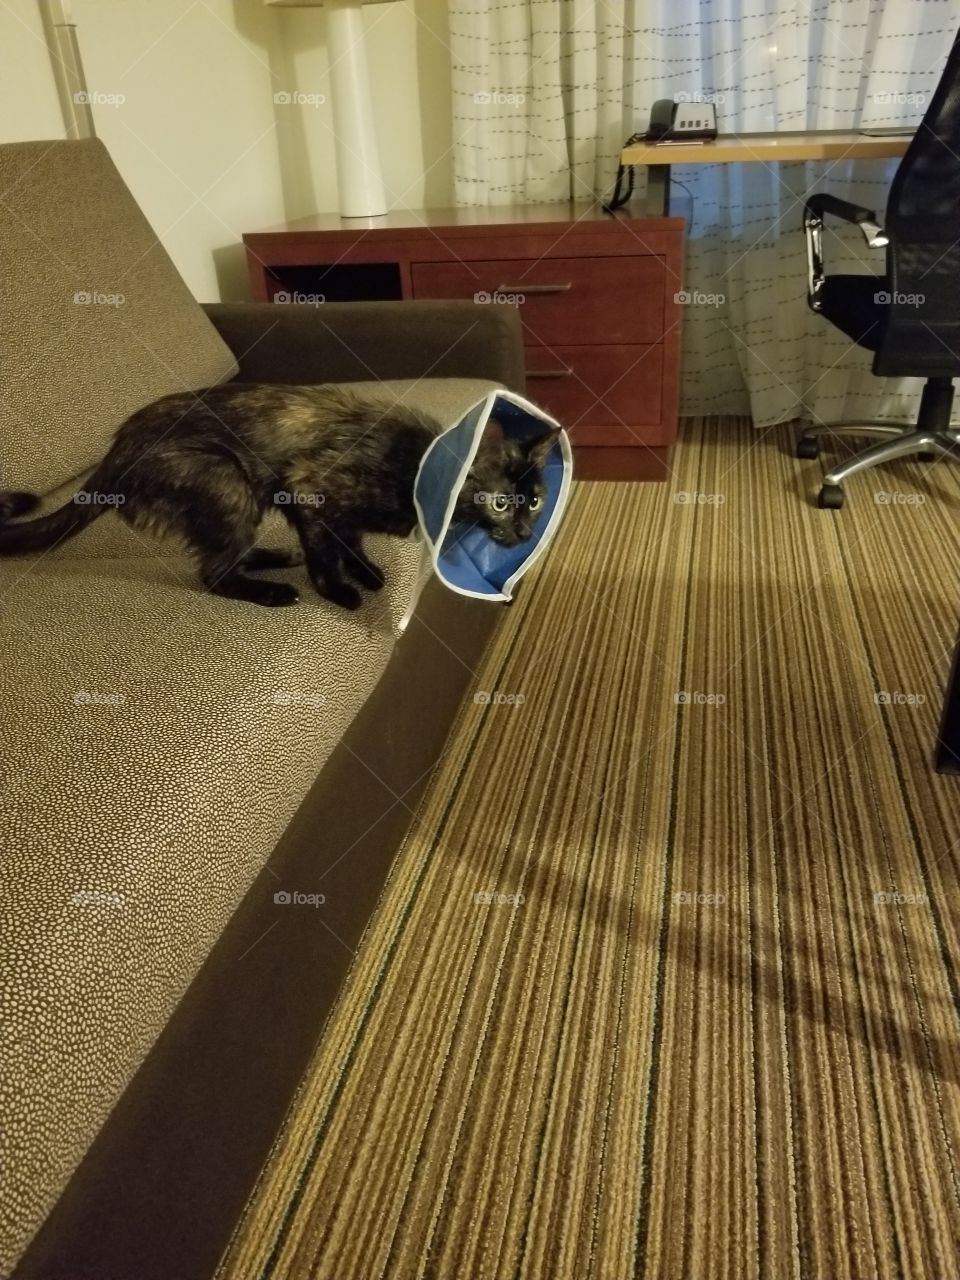 cat in the cone of shame